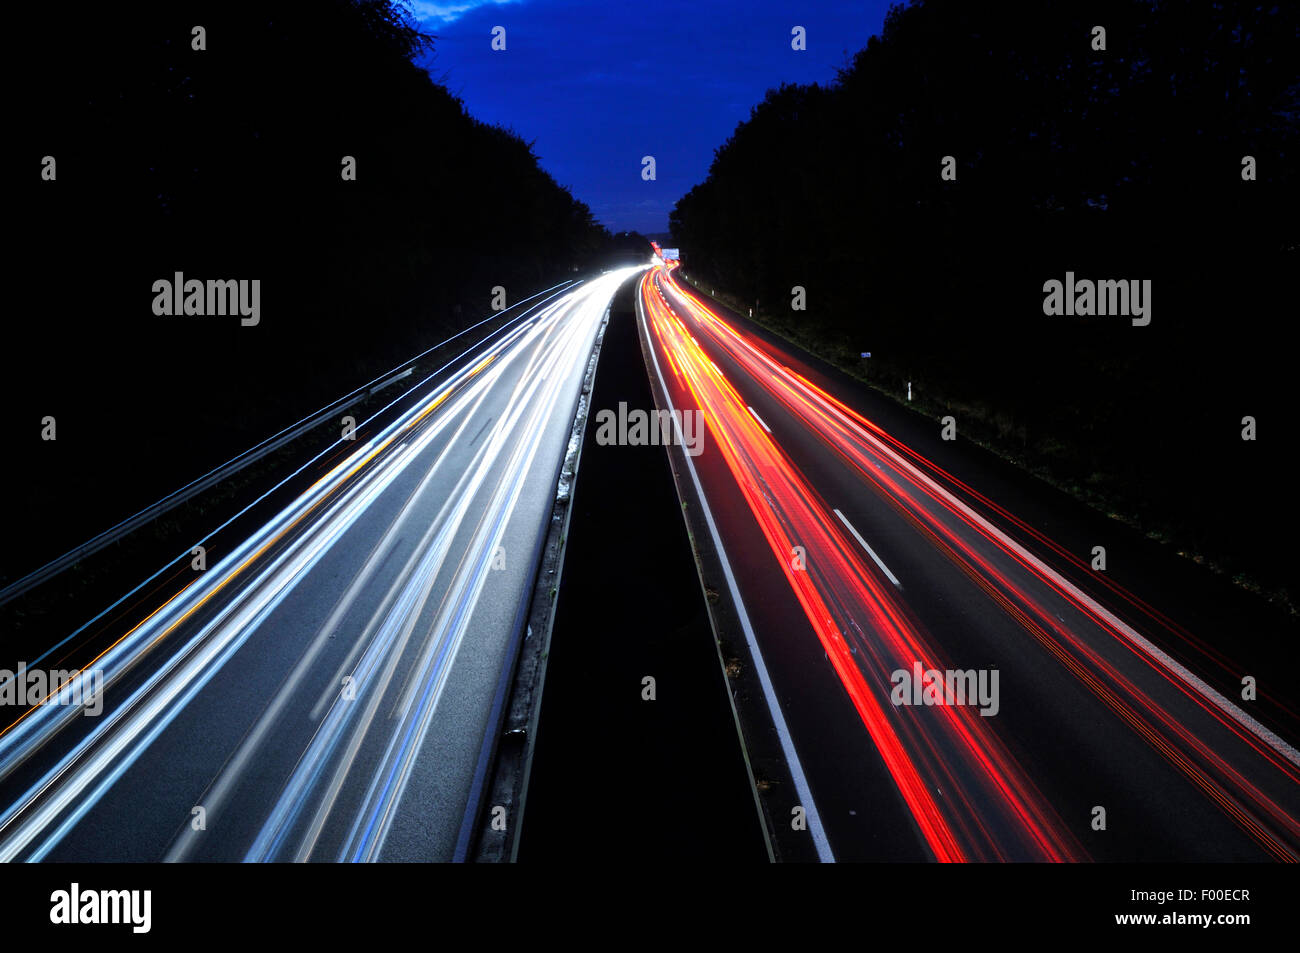 A40 motorway with light streaks in the evening Stock Photo